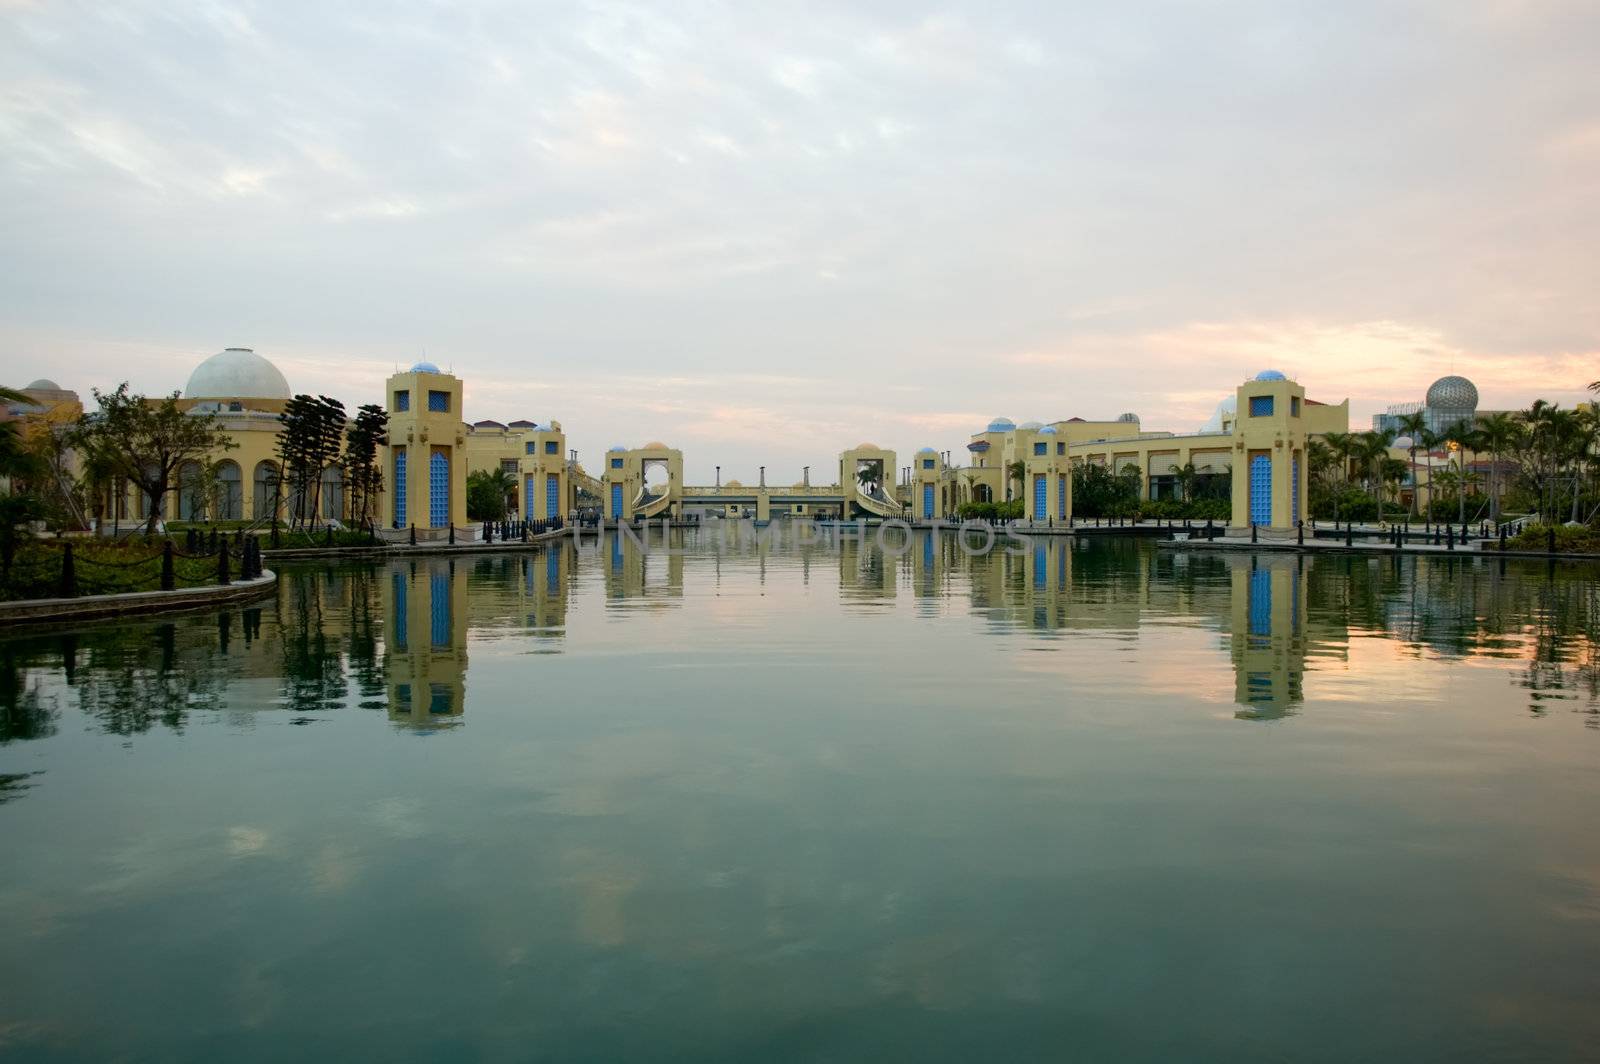 Panorama of water constructions with reflection over lake